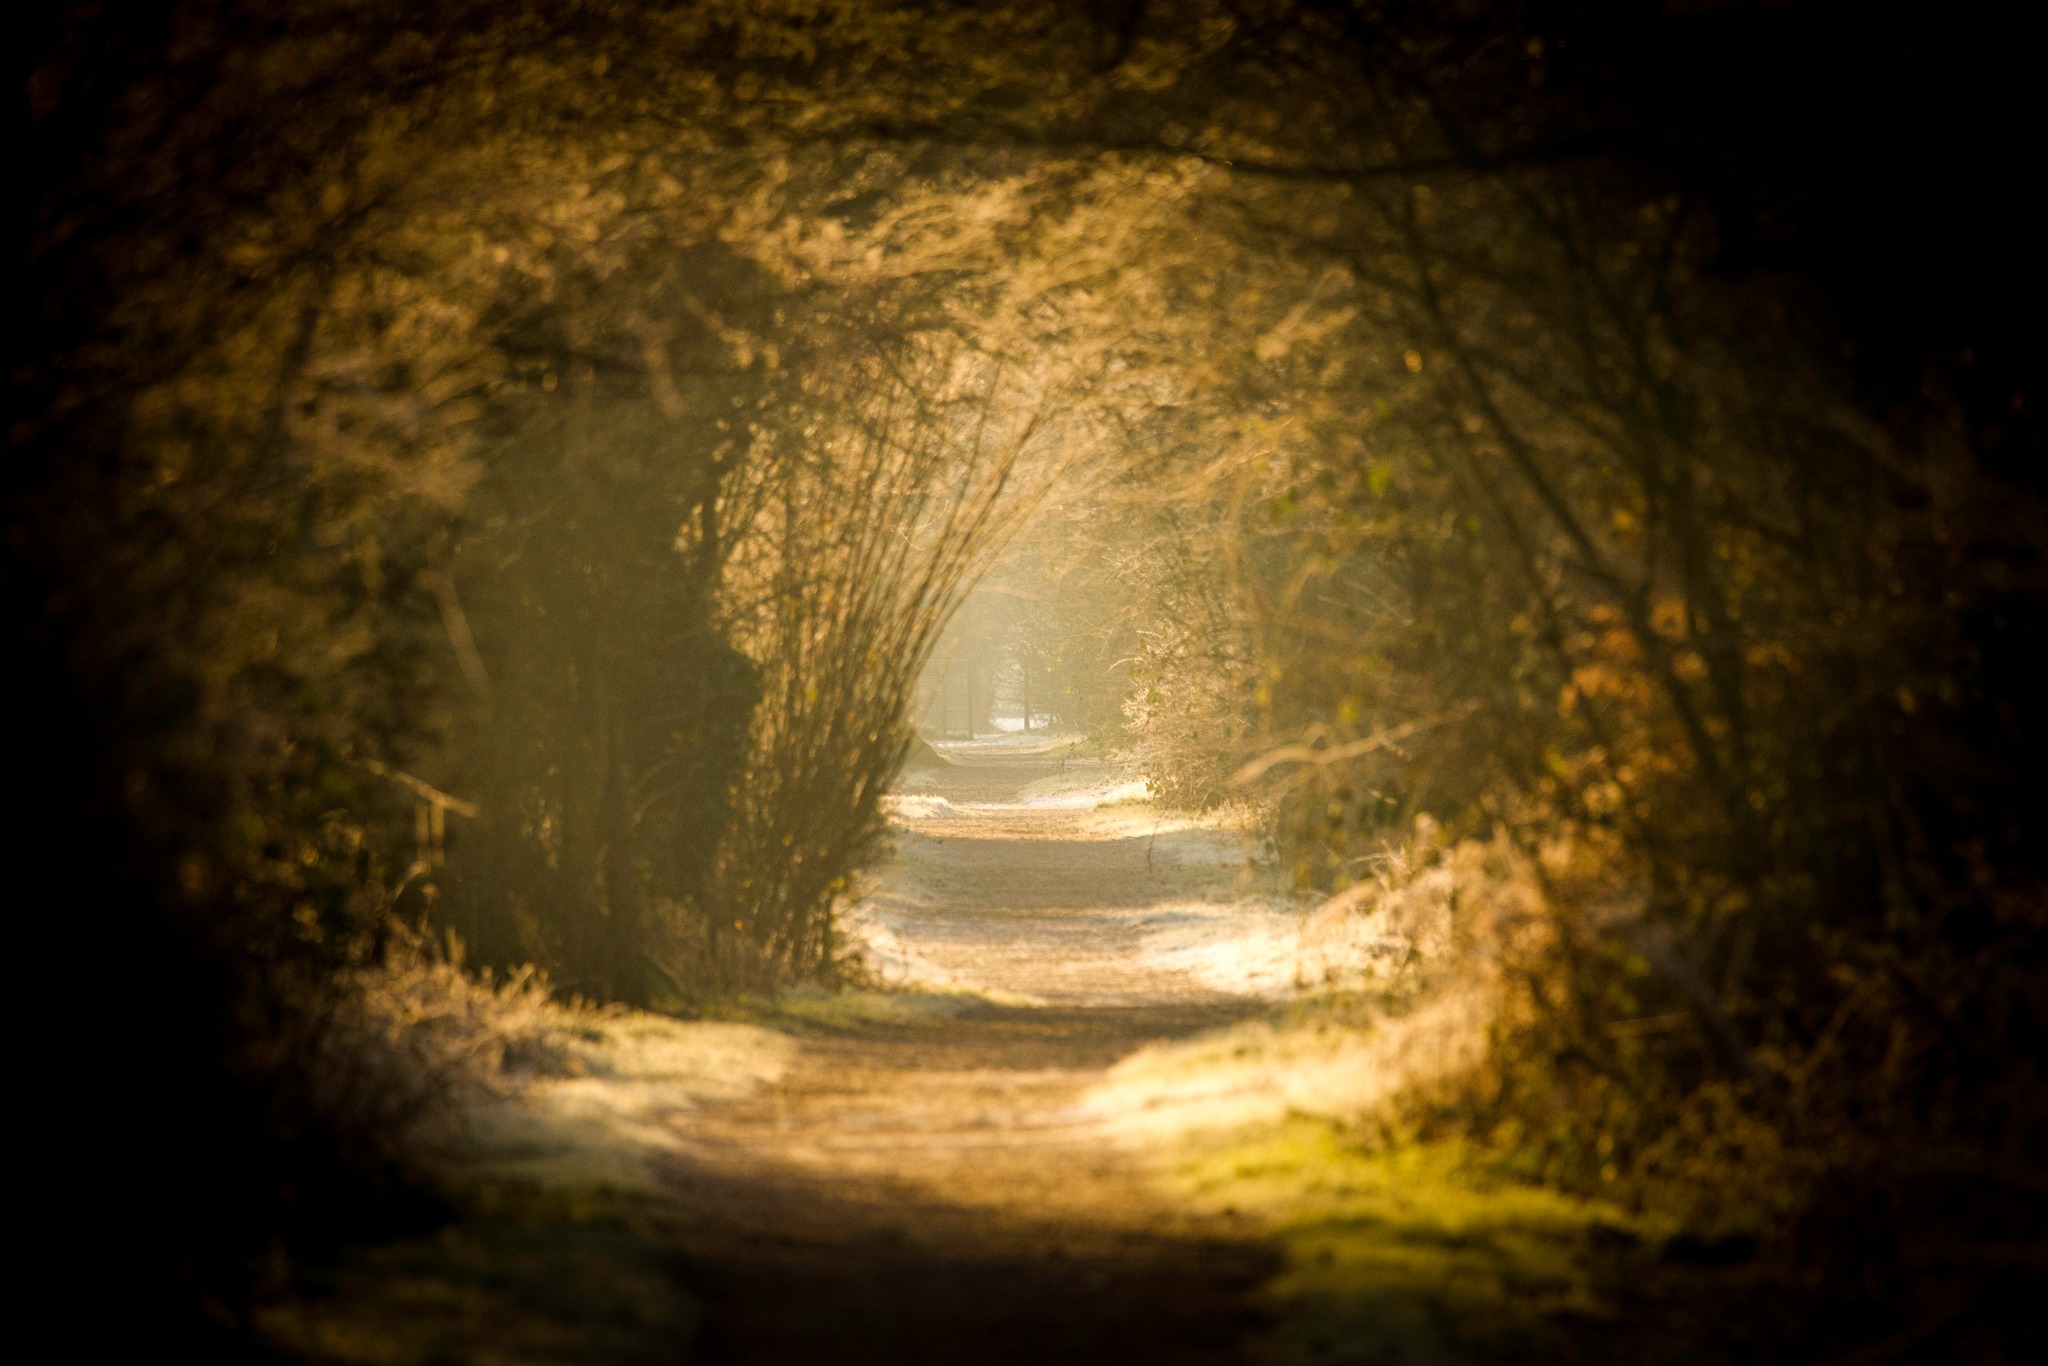 Tree tunnel shadows along the Weaver by Heather Wilde